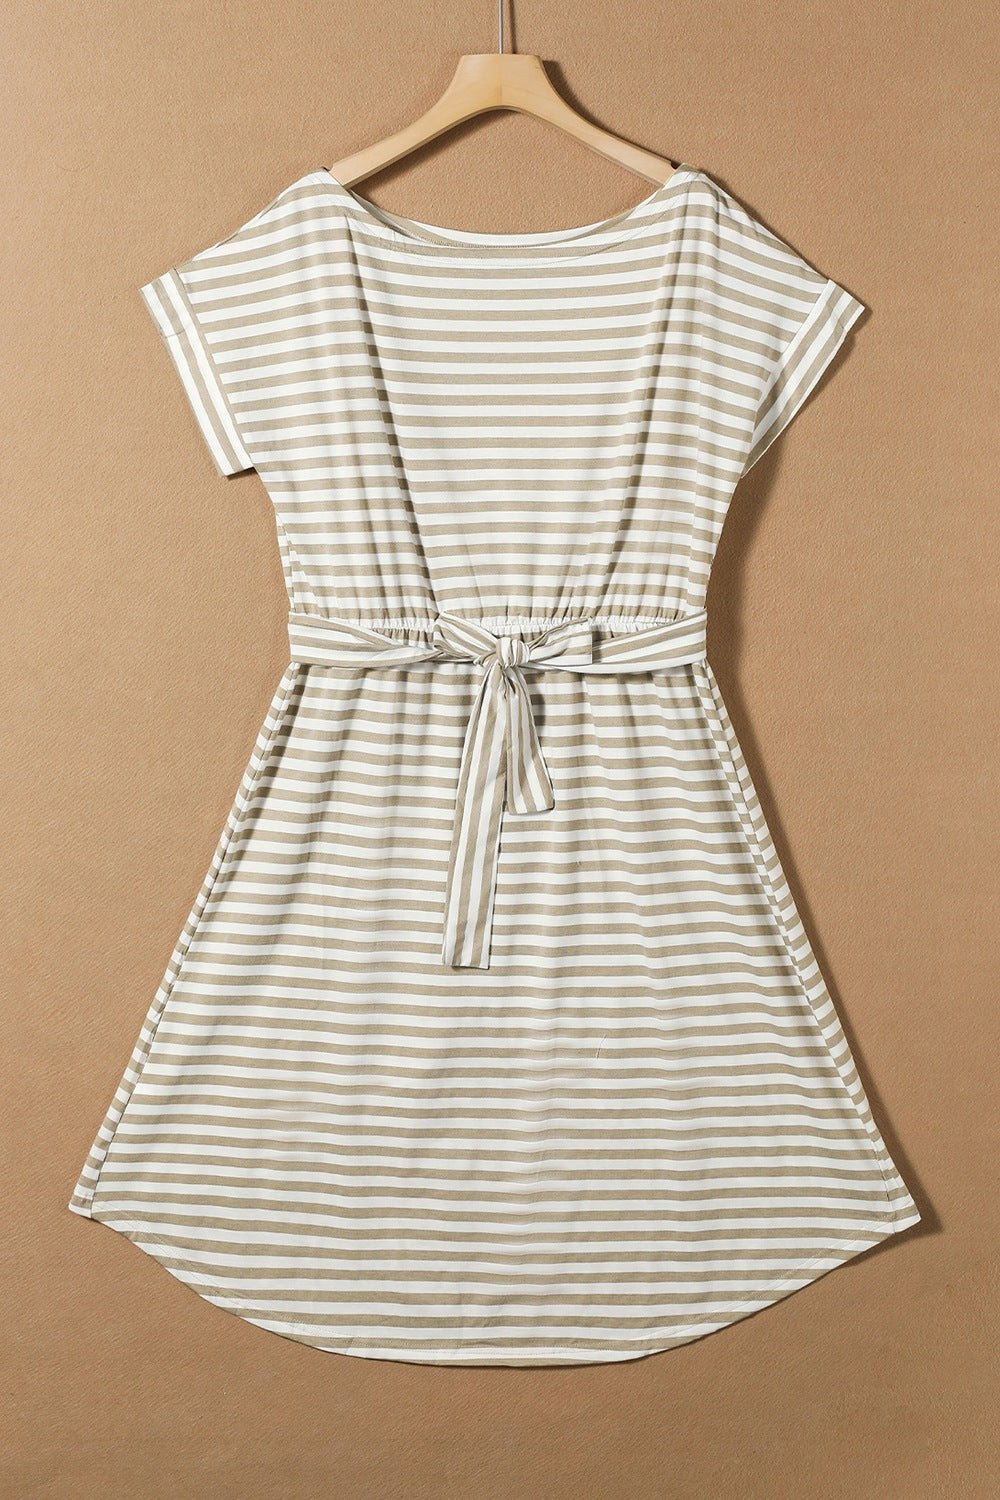 The image is showcasing a Tied Striped Cap Sleeve Mini Dress Casual Summer Beach Short Sundress Cotton Blend at Mommy & Lino's Closet